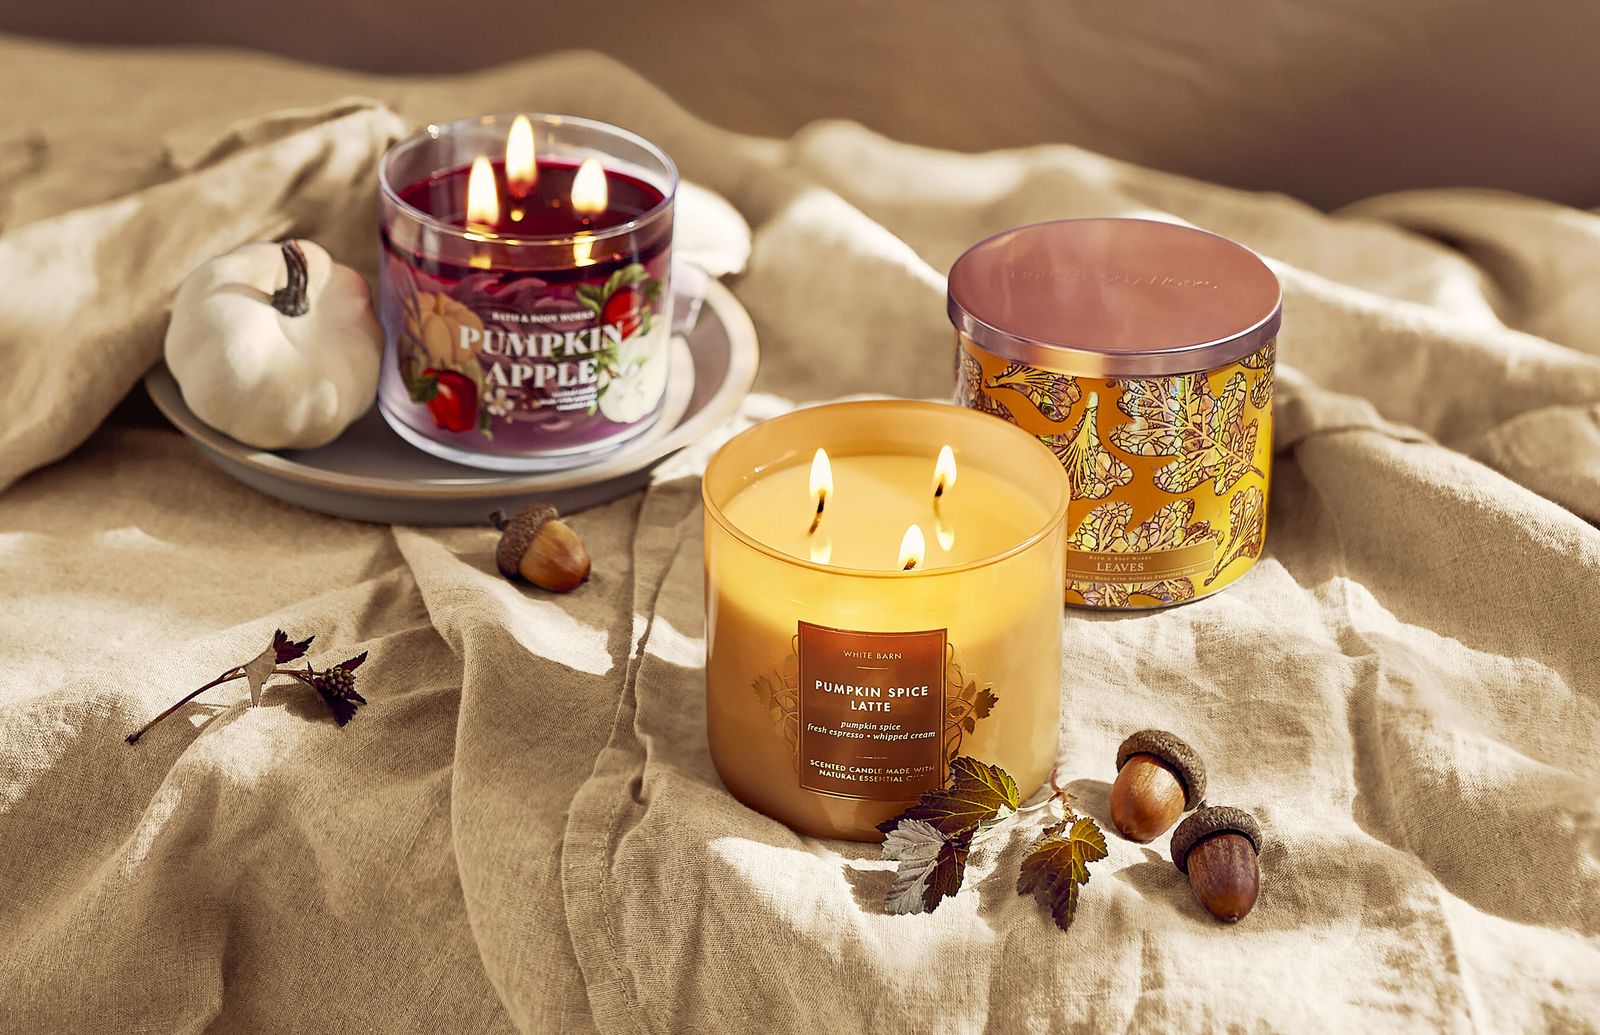 A display of three Bath & Body Works fall candles in various scents and colors